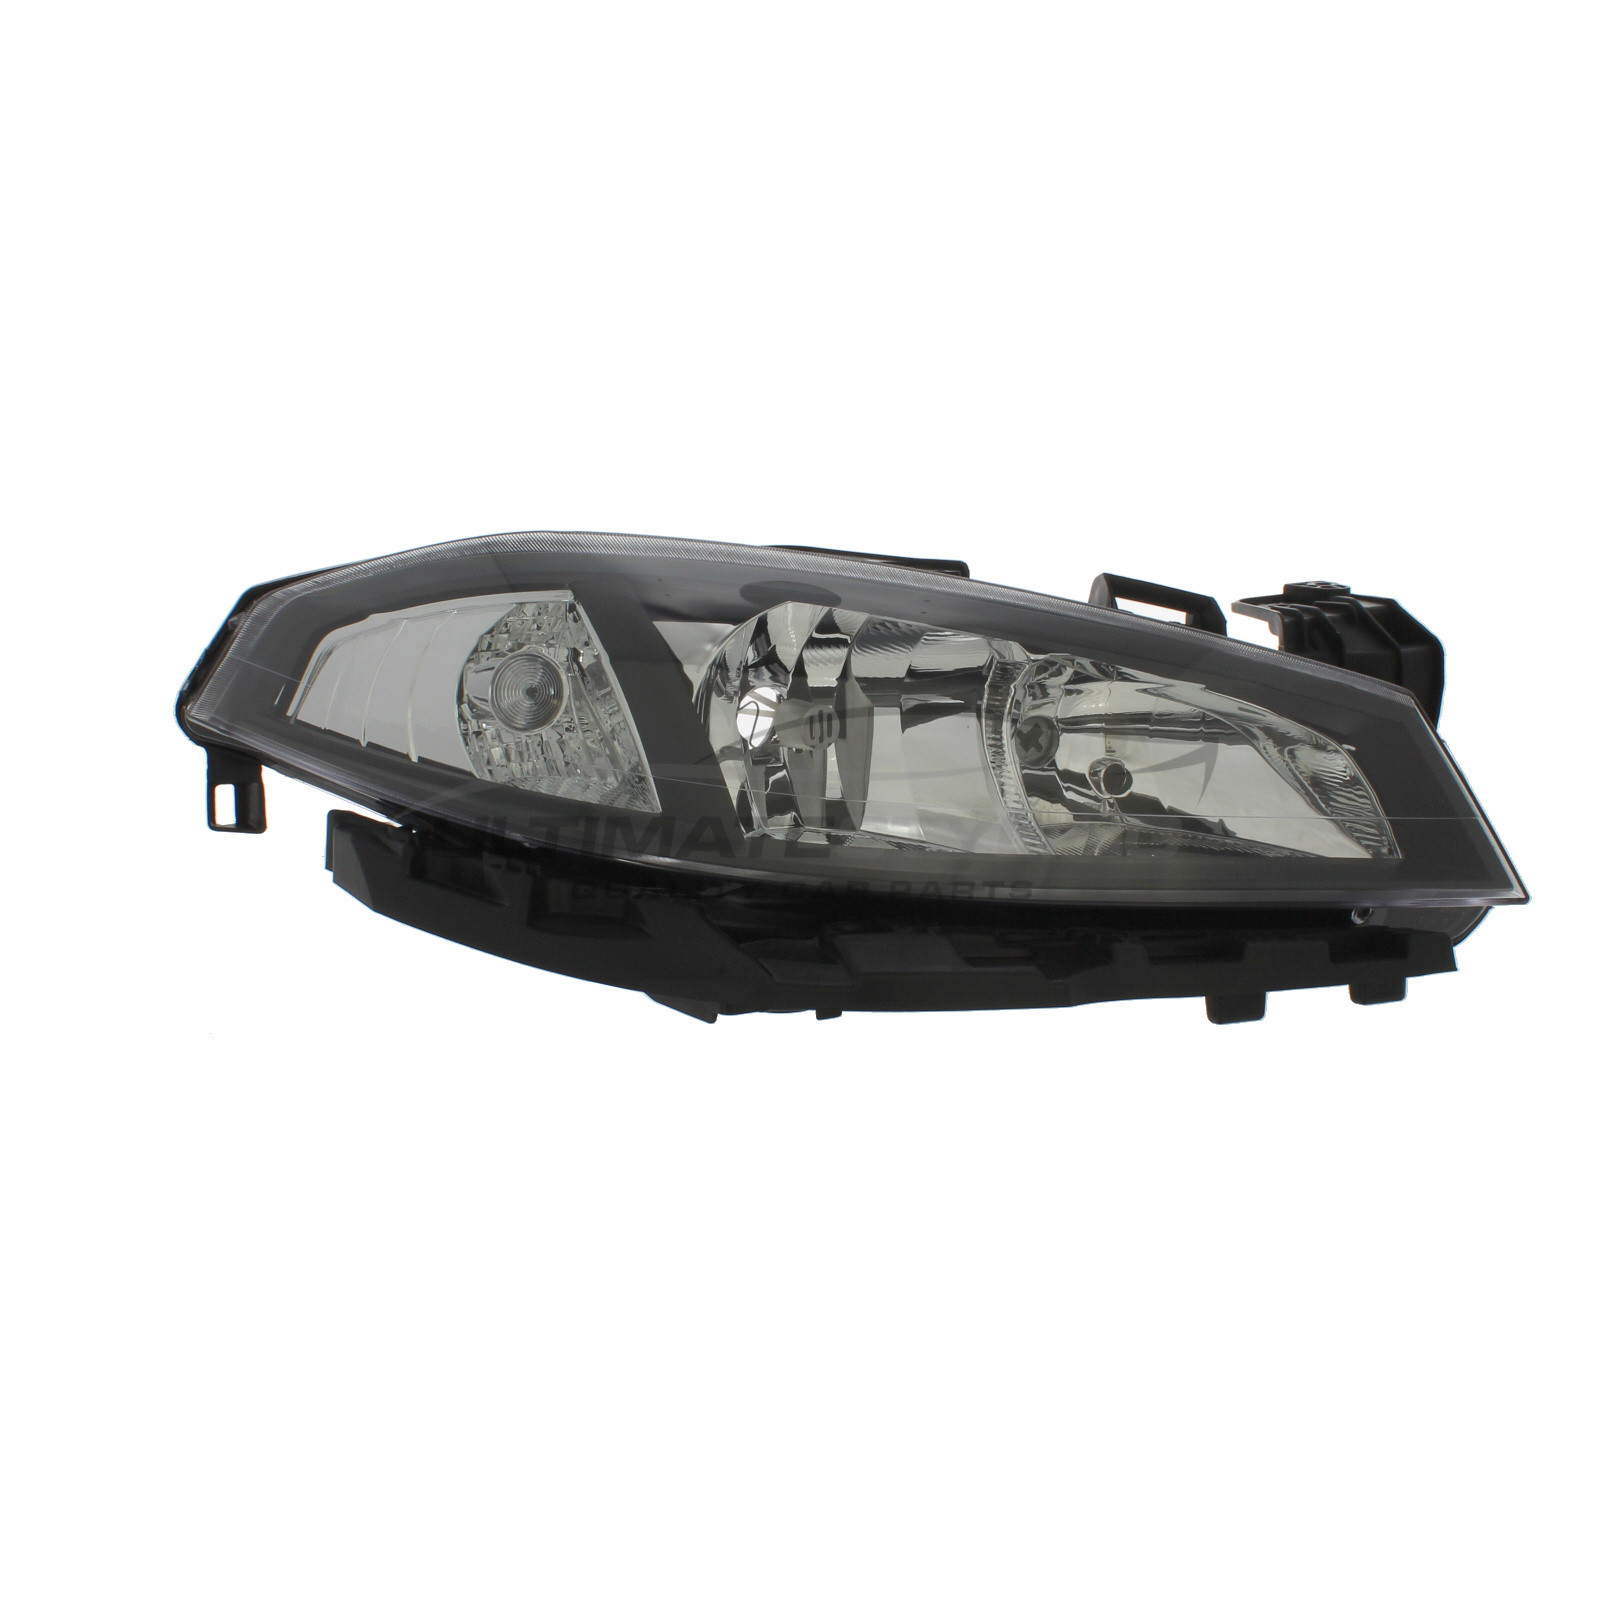 Renault Laguna 2005-2007 Halogen, Electric Without Motor, Chrome Headlight / Headlamp with Black Surround Drivers Side (RH)